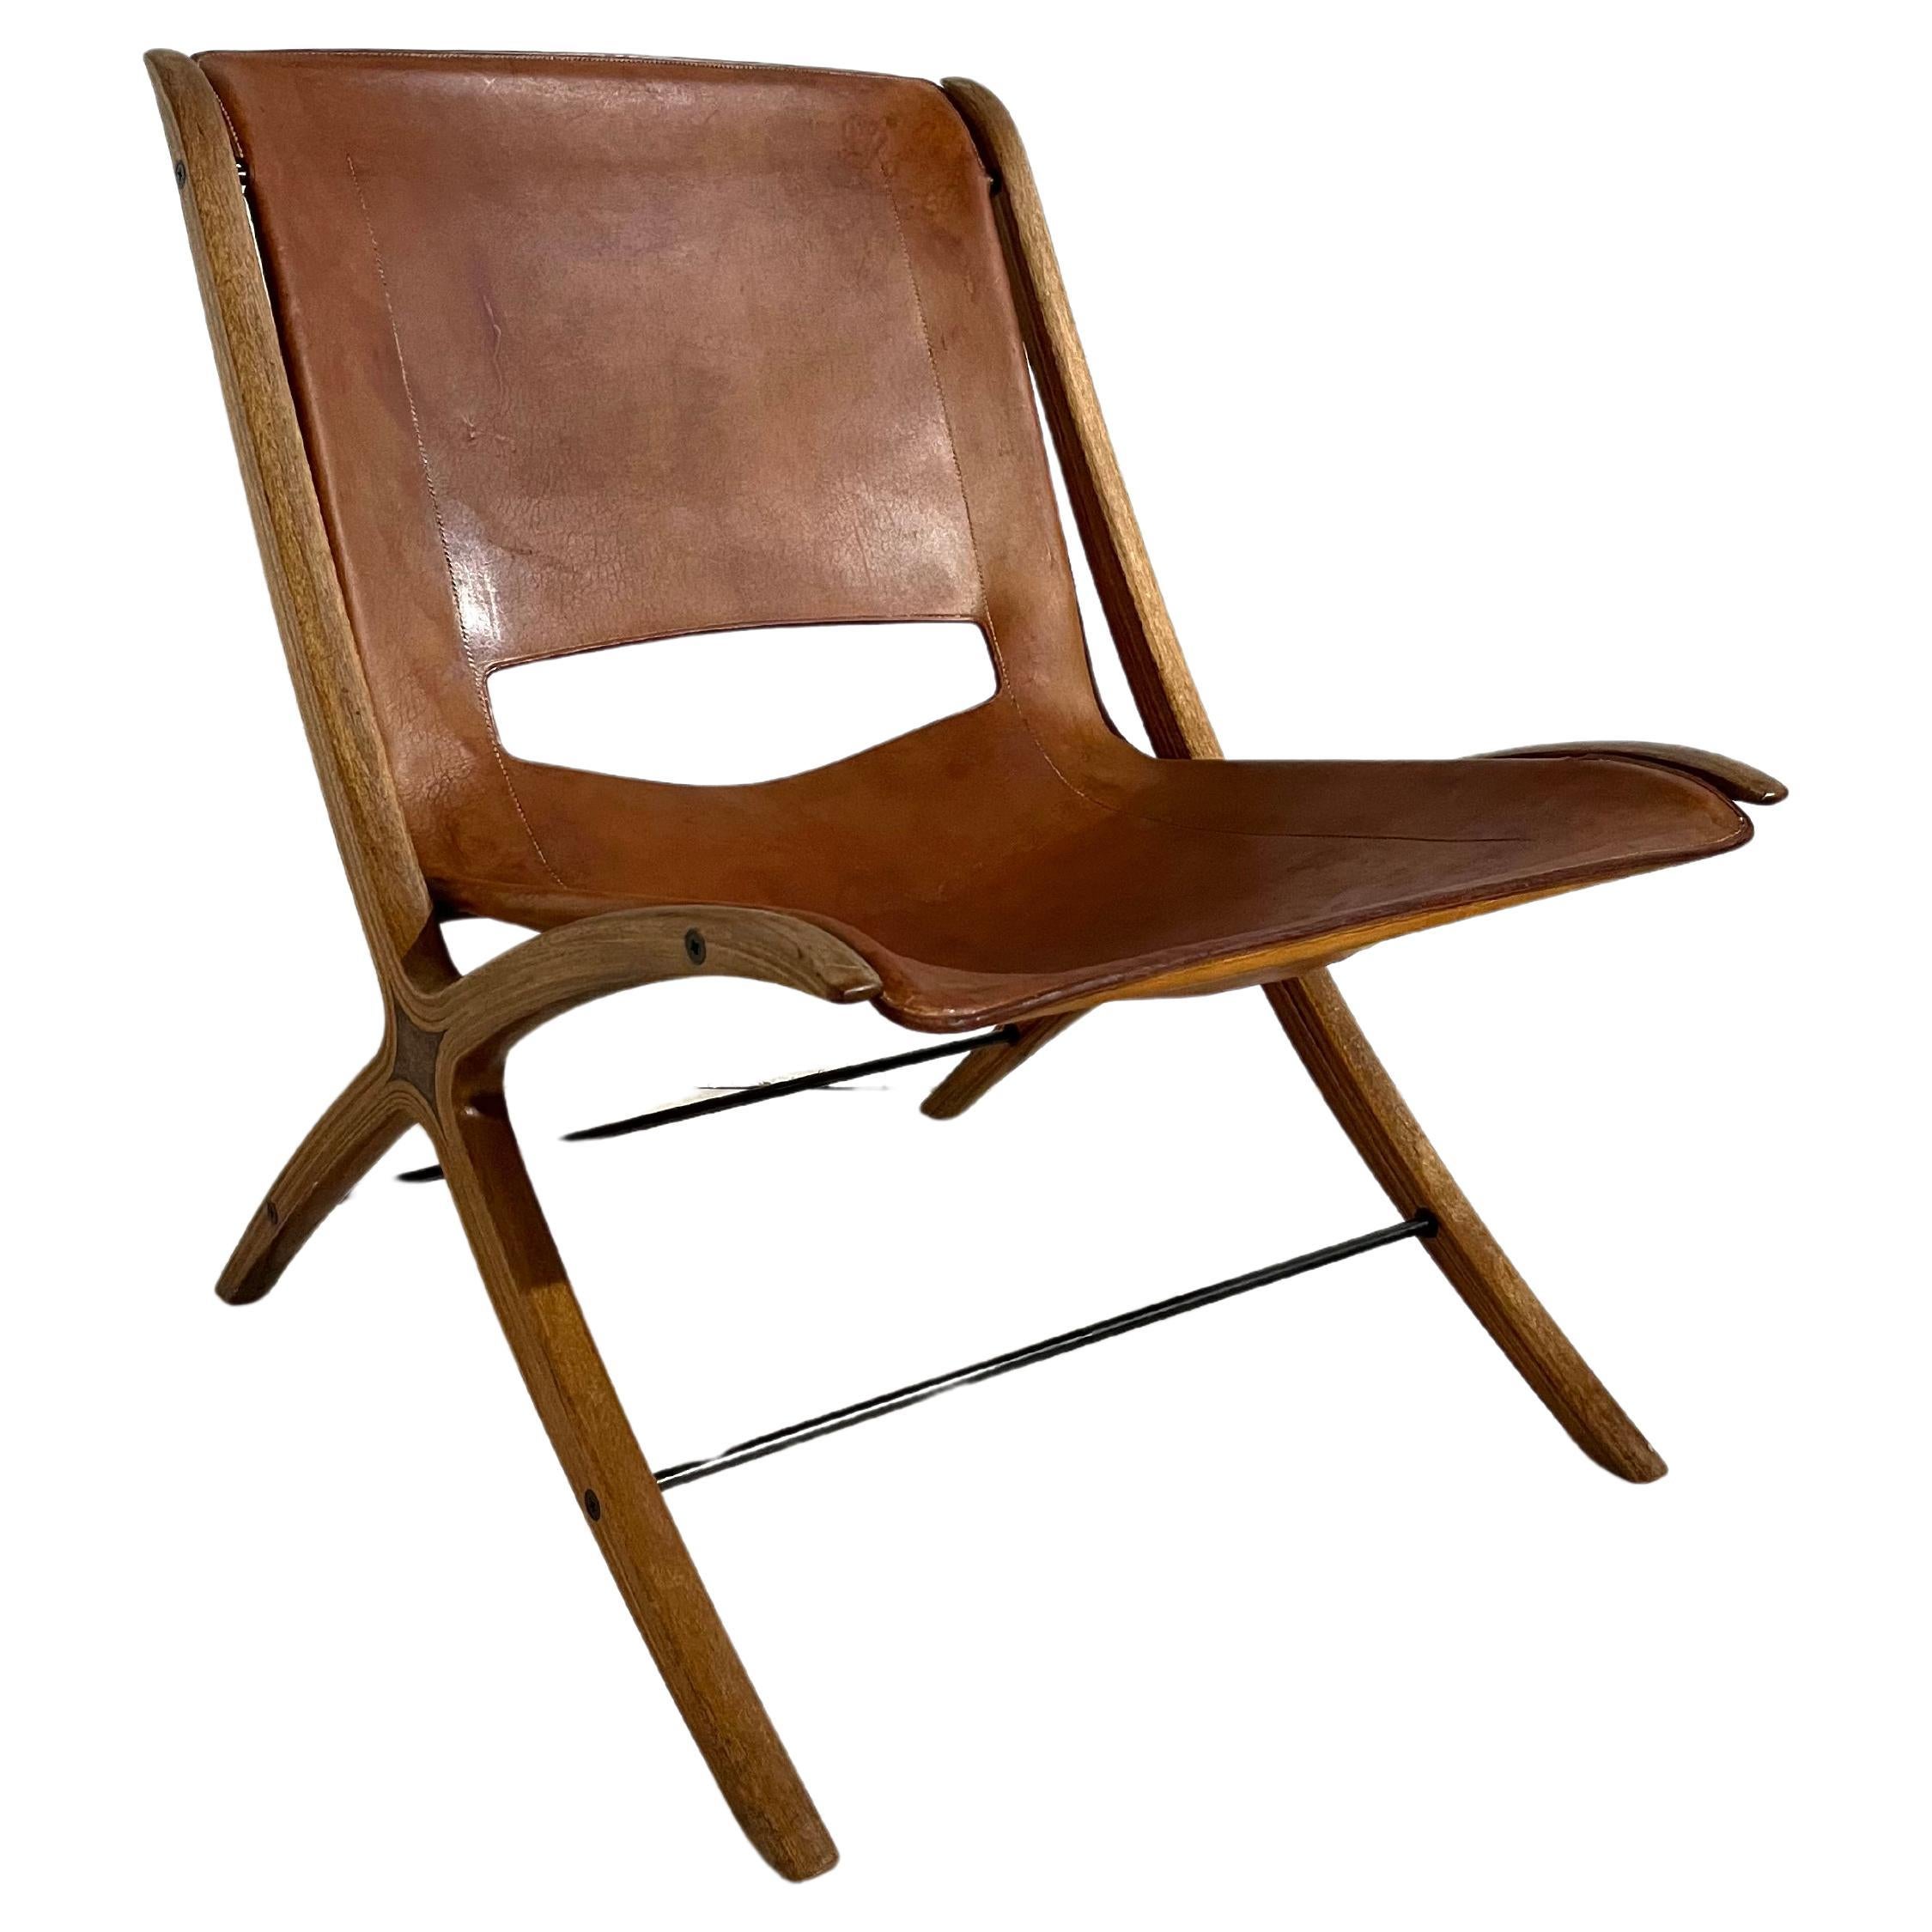 Rare sculpturable "X Chair" by Hvidt & Mølgaard for Fritz Hansen from 1959 For Sale